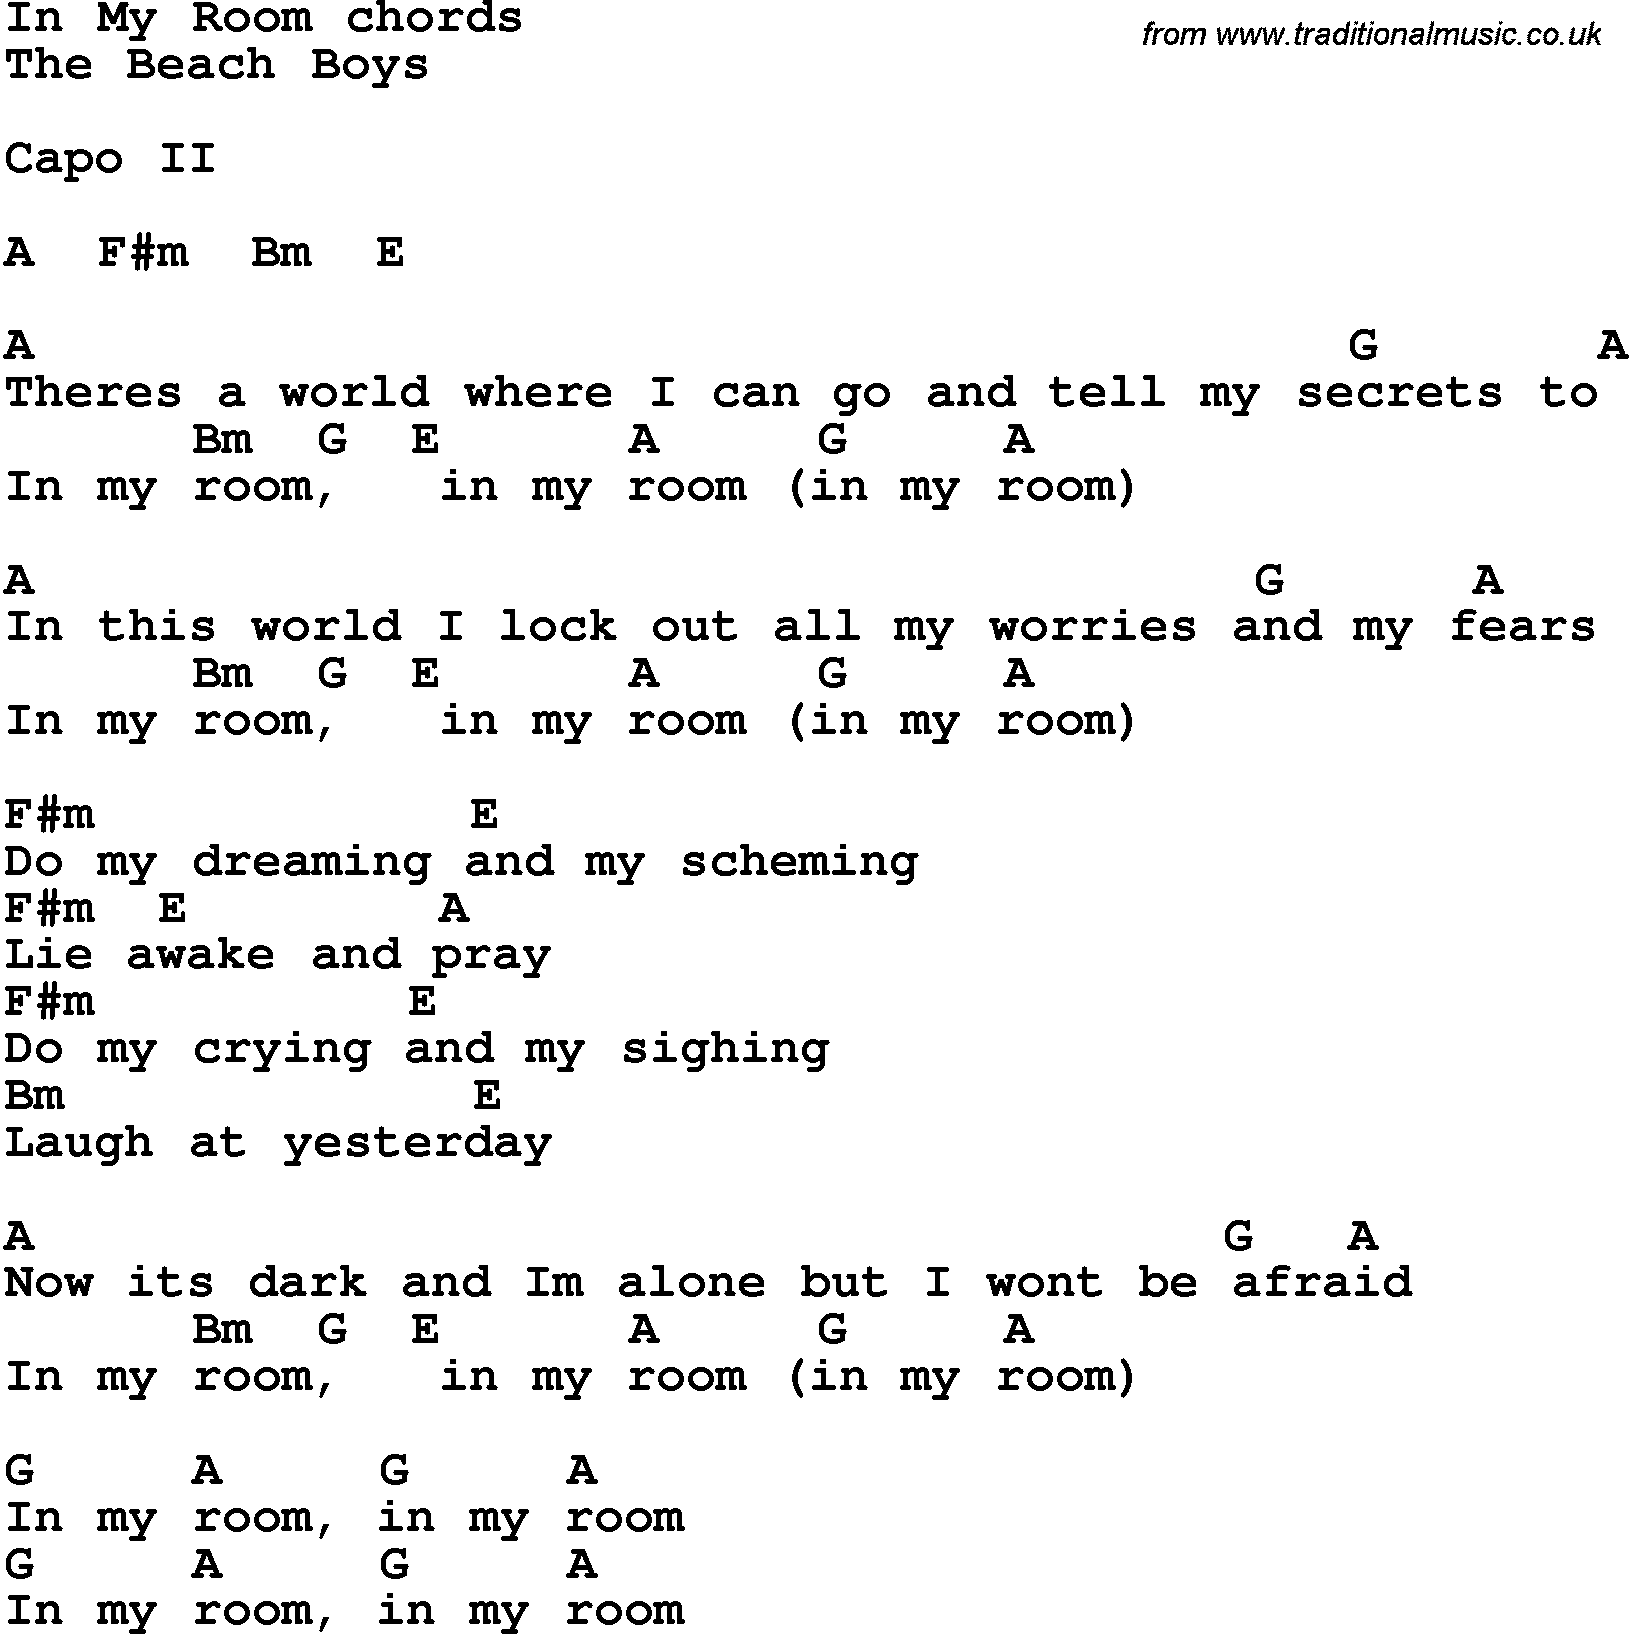 Song Lyrics with guitar chords for In My Room